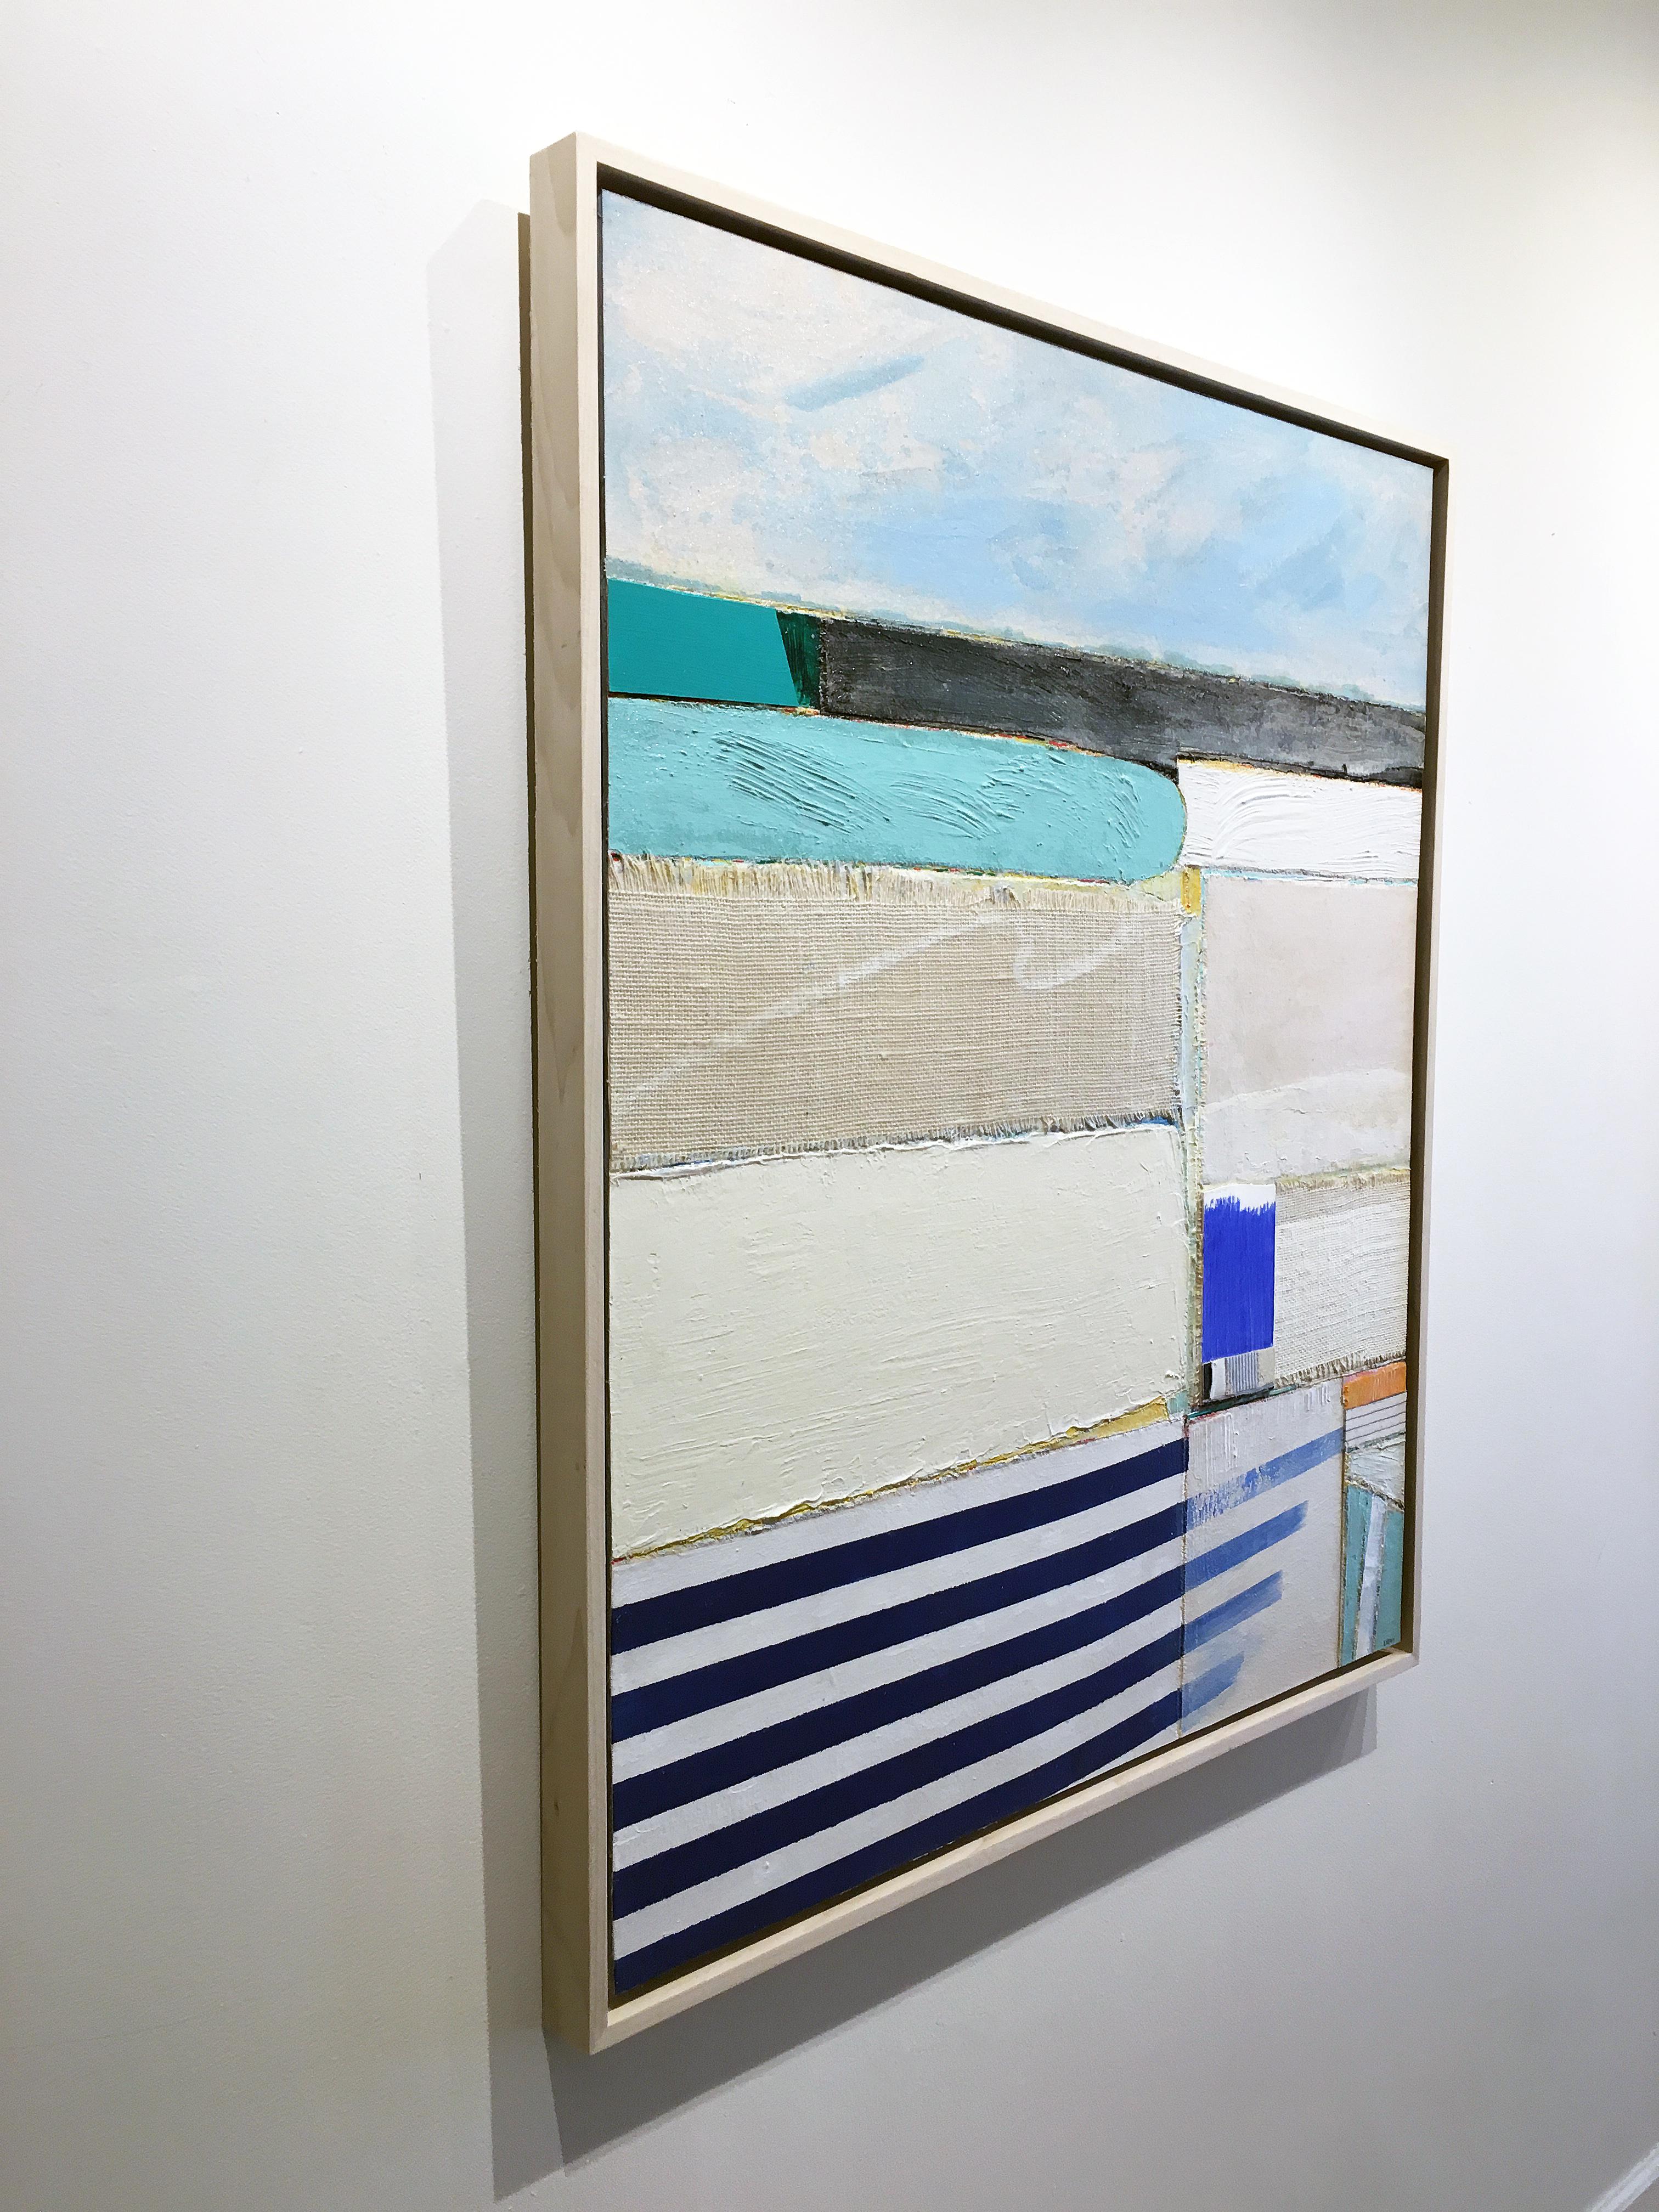 'Emerald Isle' by Eugene Healy, 2018. Fabric collage and oil on canvas, 39 x 33 in. This landscape painting features an abstracted coastal scene with land and sea in aerial view.  Healy incorporates sections of texture and relief with use of fabric